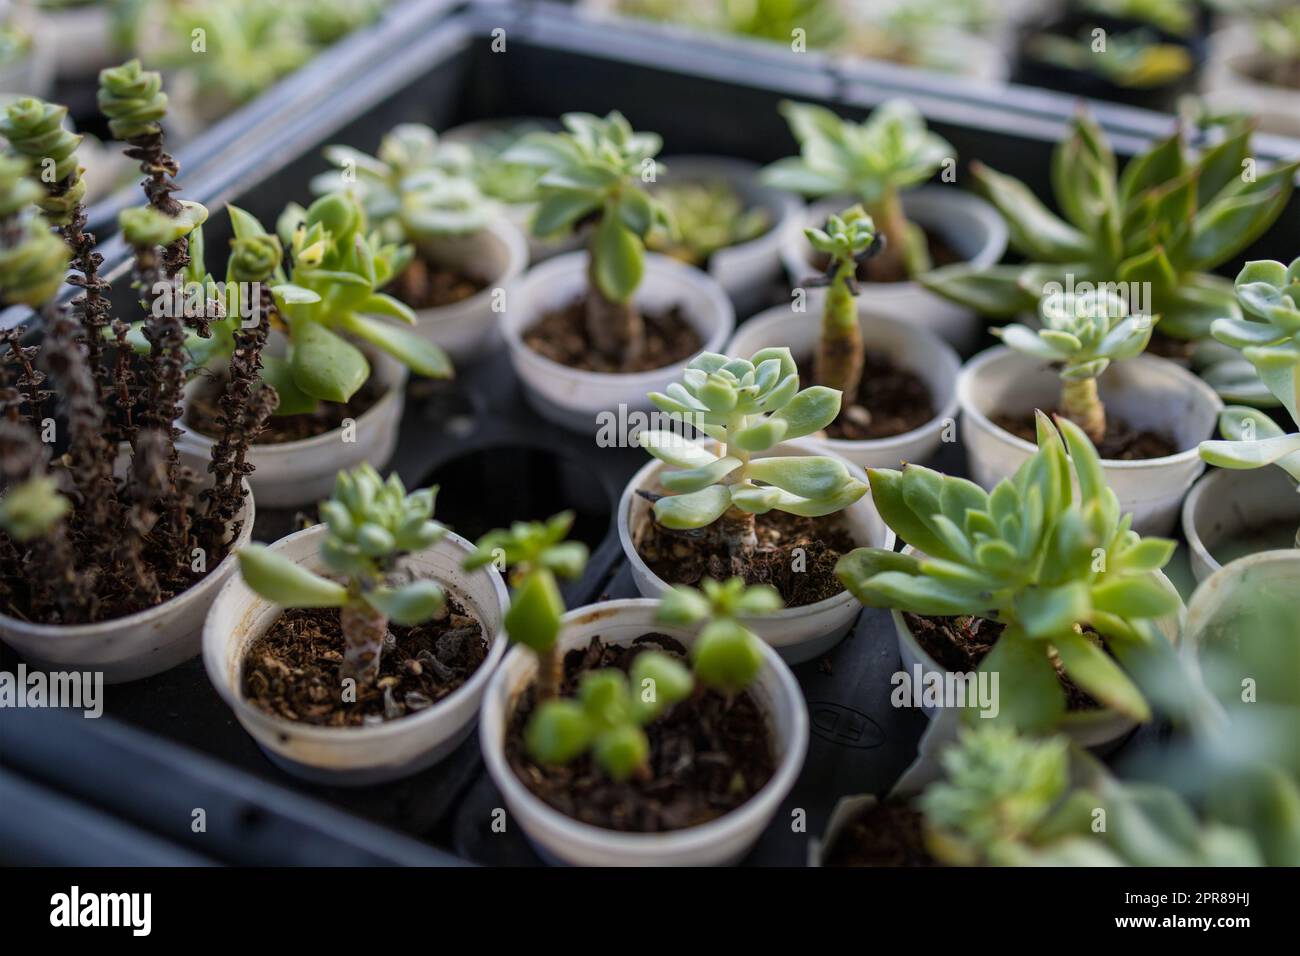 Lots of potted succulent plants Stock Photo